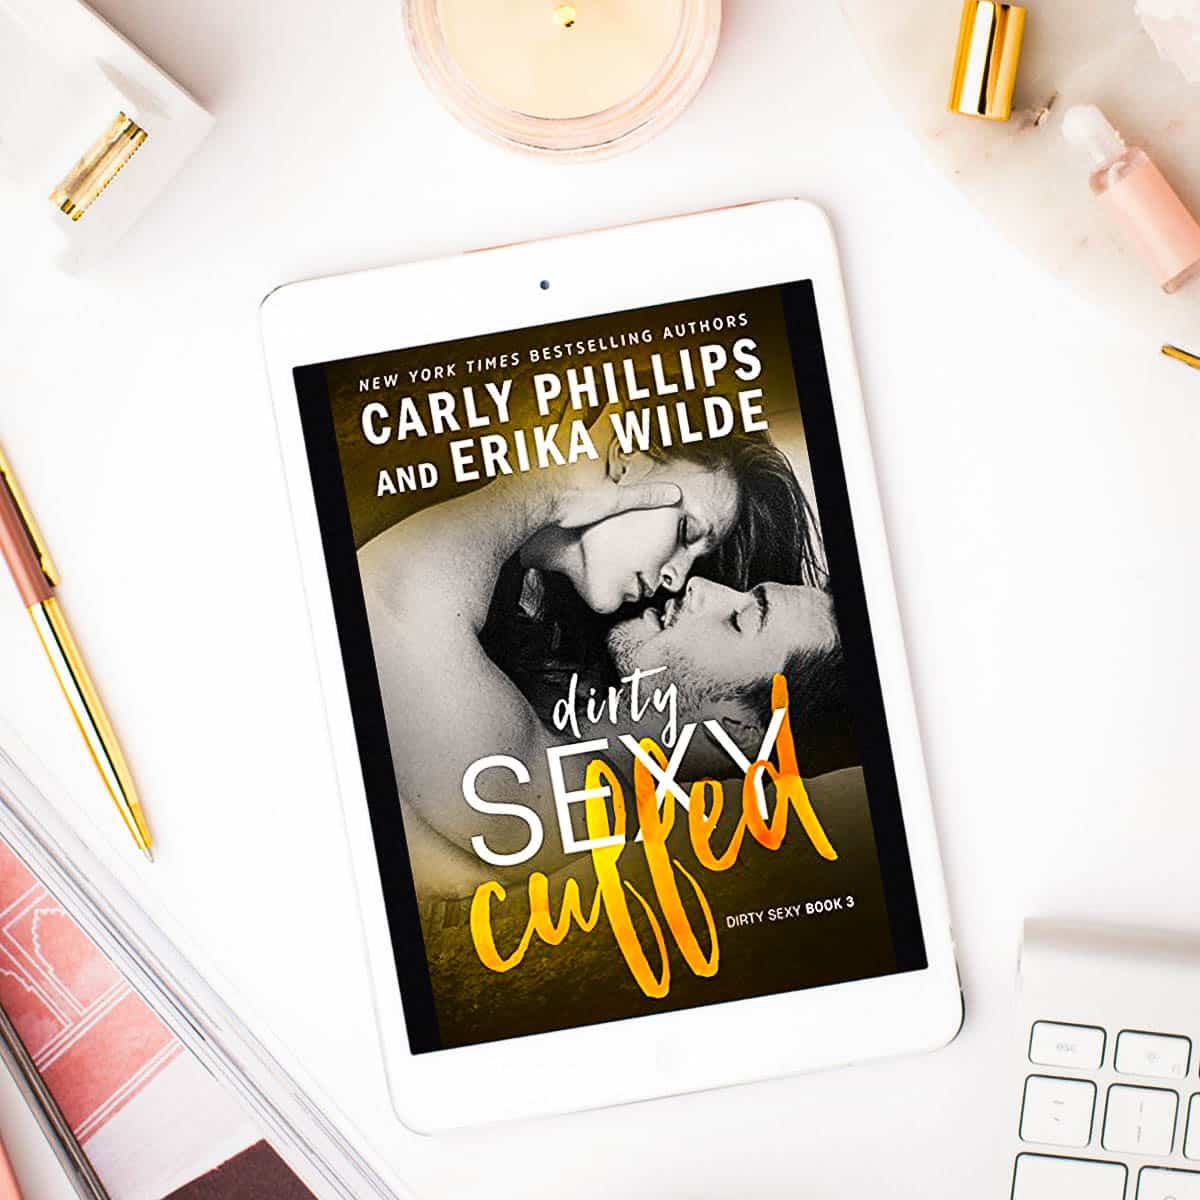 Dirty Sexy Cuffed by Carly Phillips and Erika Wilde is a contemporary romance with a good guy and dominant alpha who saves a damsel in distress with plenty of chemistry and steam!